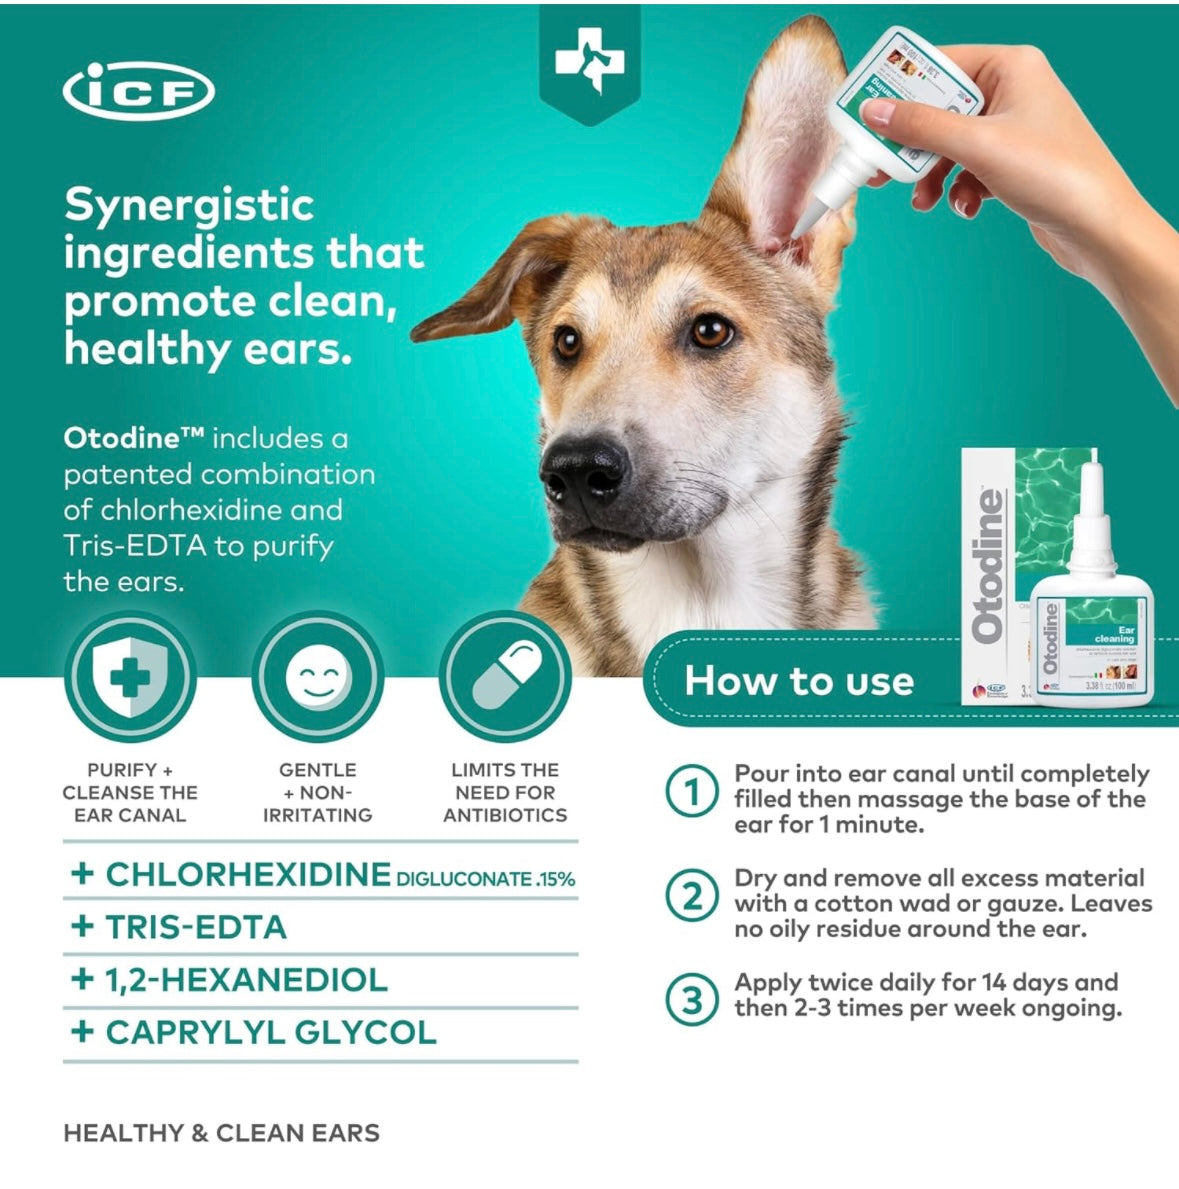 Dog Ear Cleaning a fast acting solution to relieve ear problems